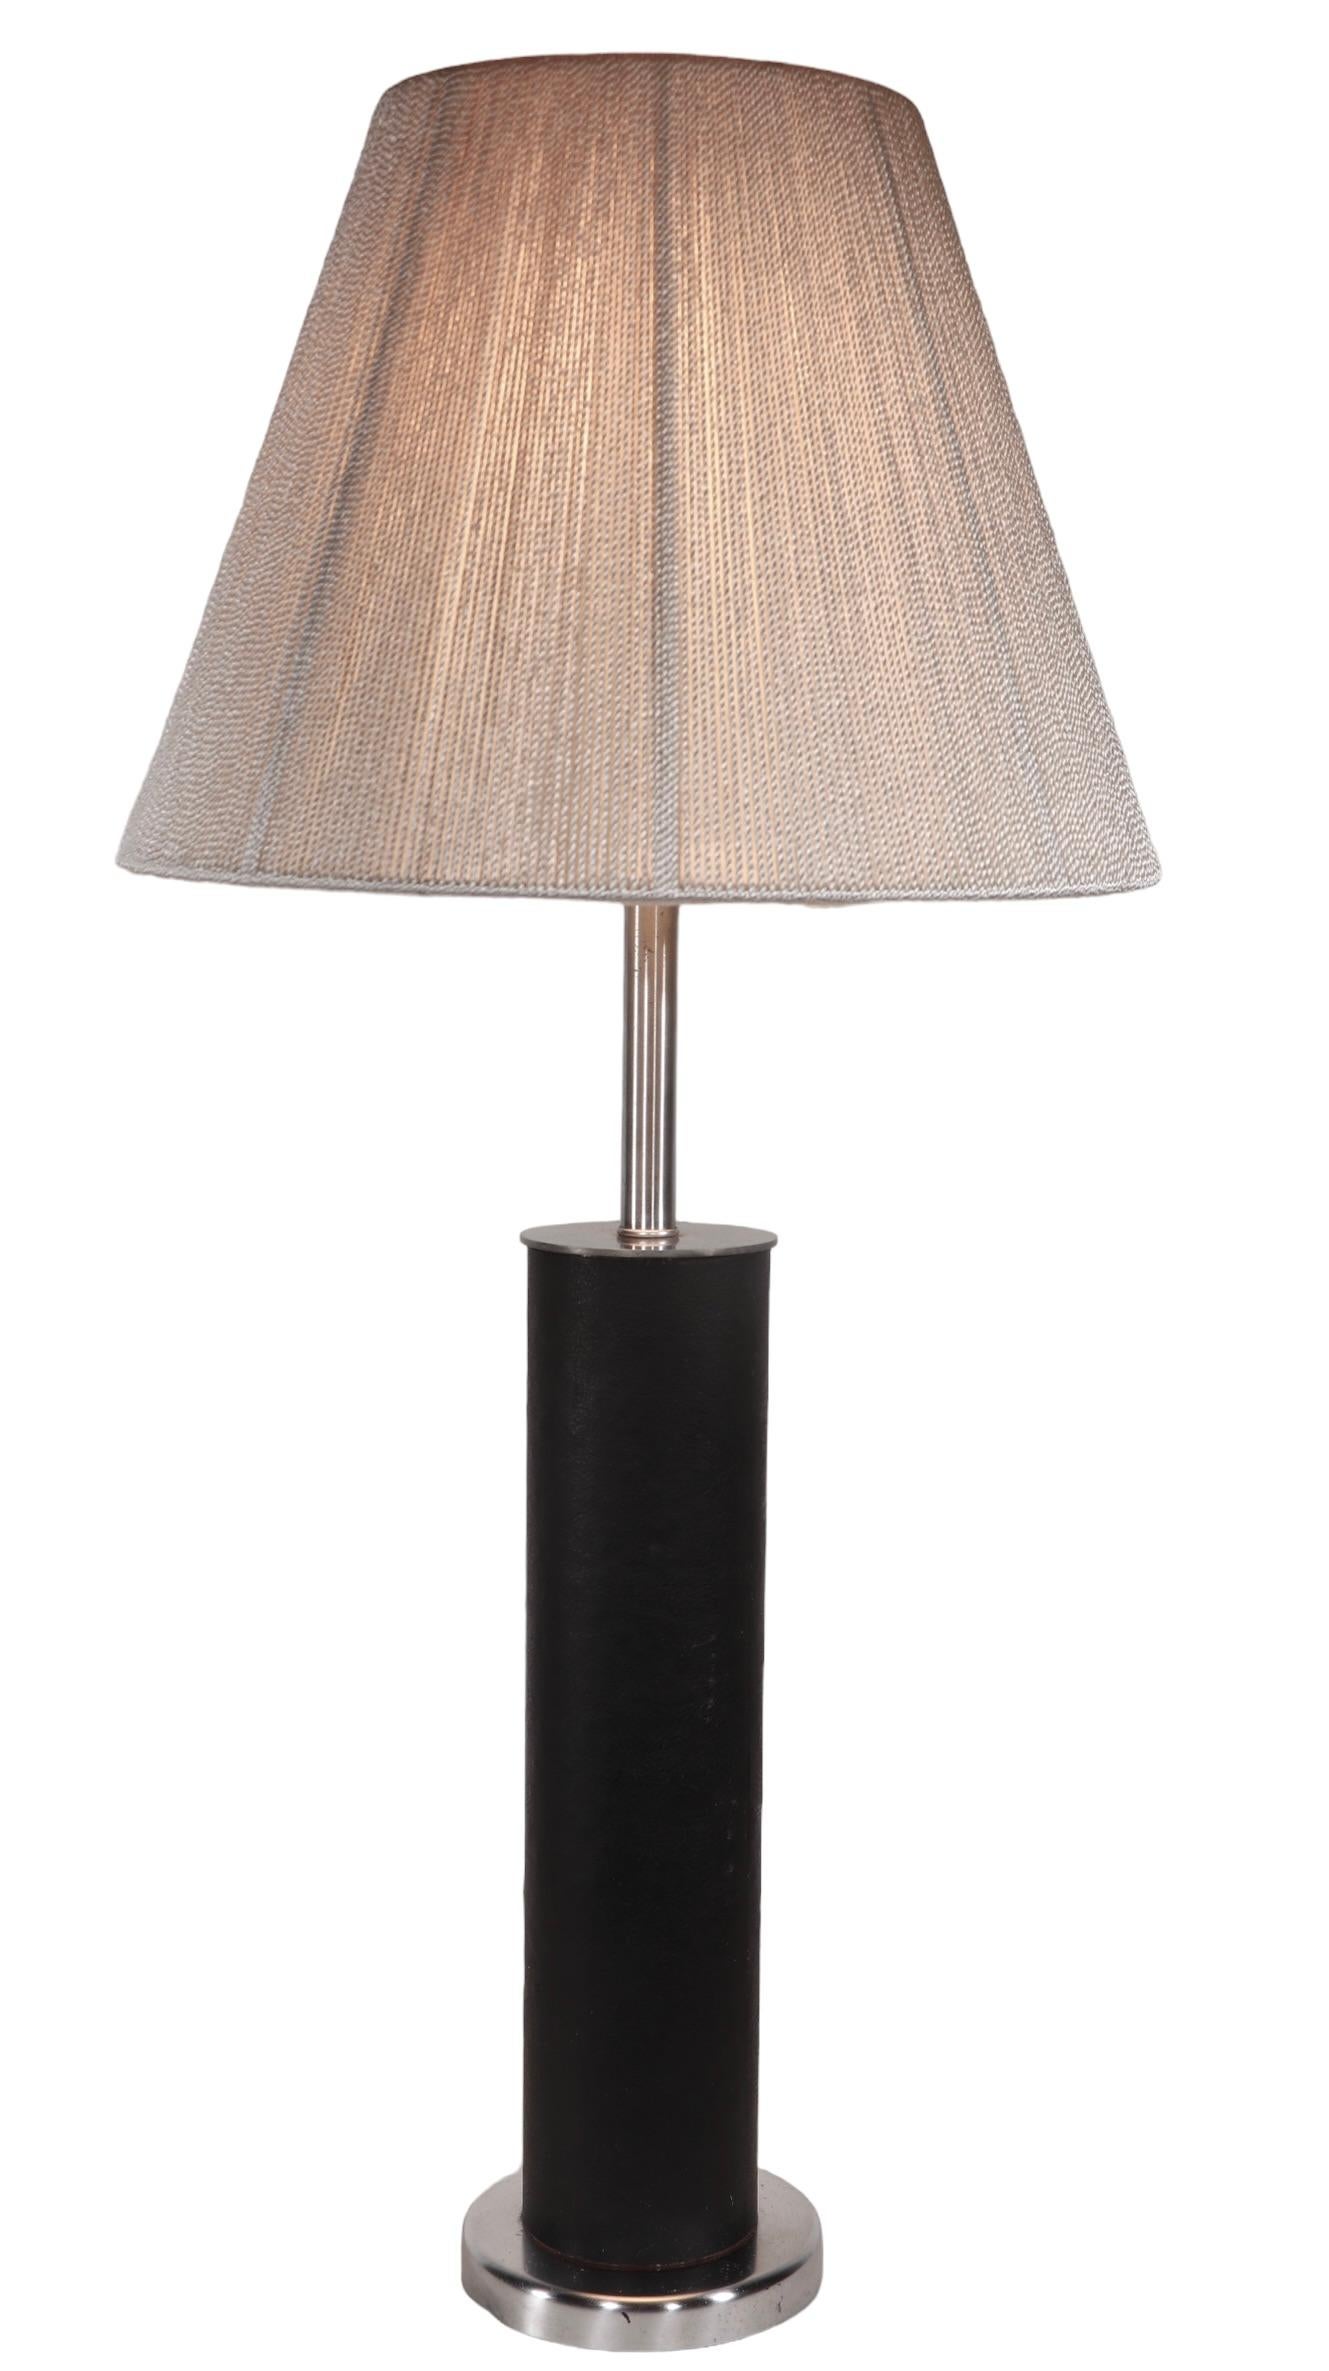  Modernist Leather and Steel Table Lamp by Walter Von Nessen c 1960's  For Sale 13